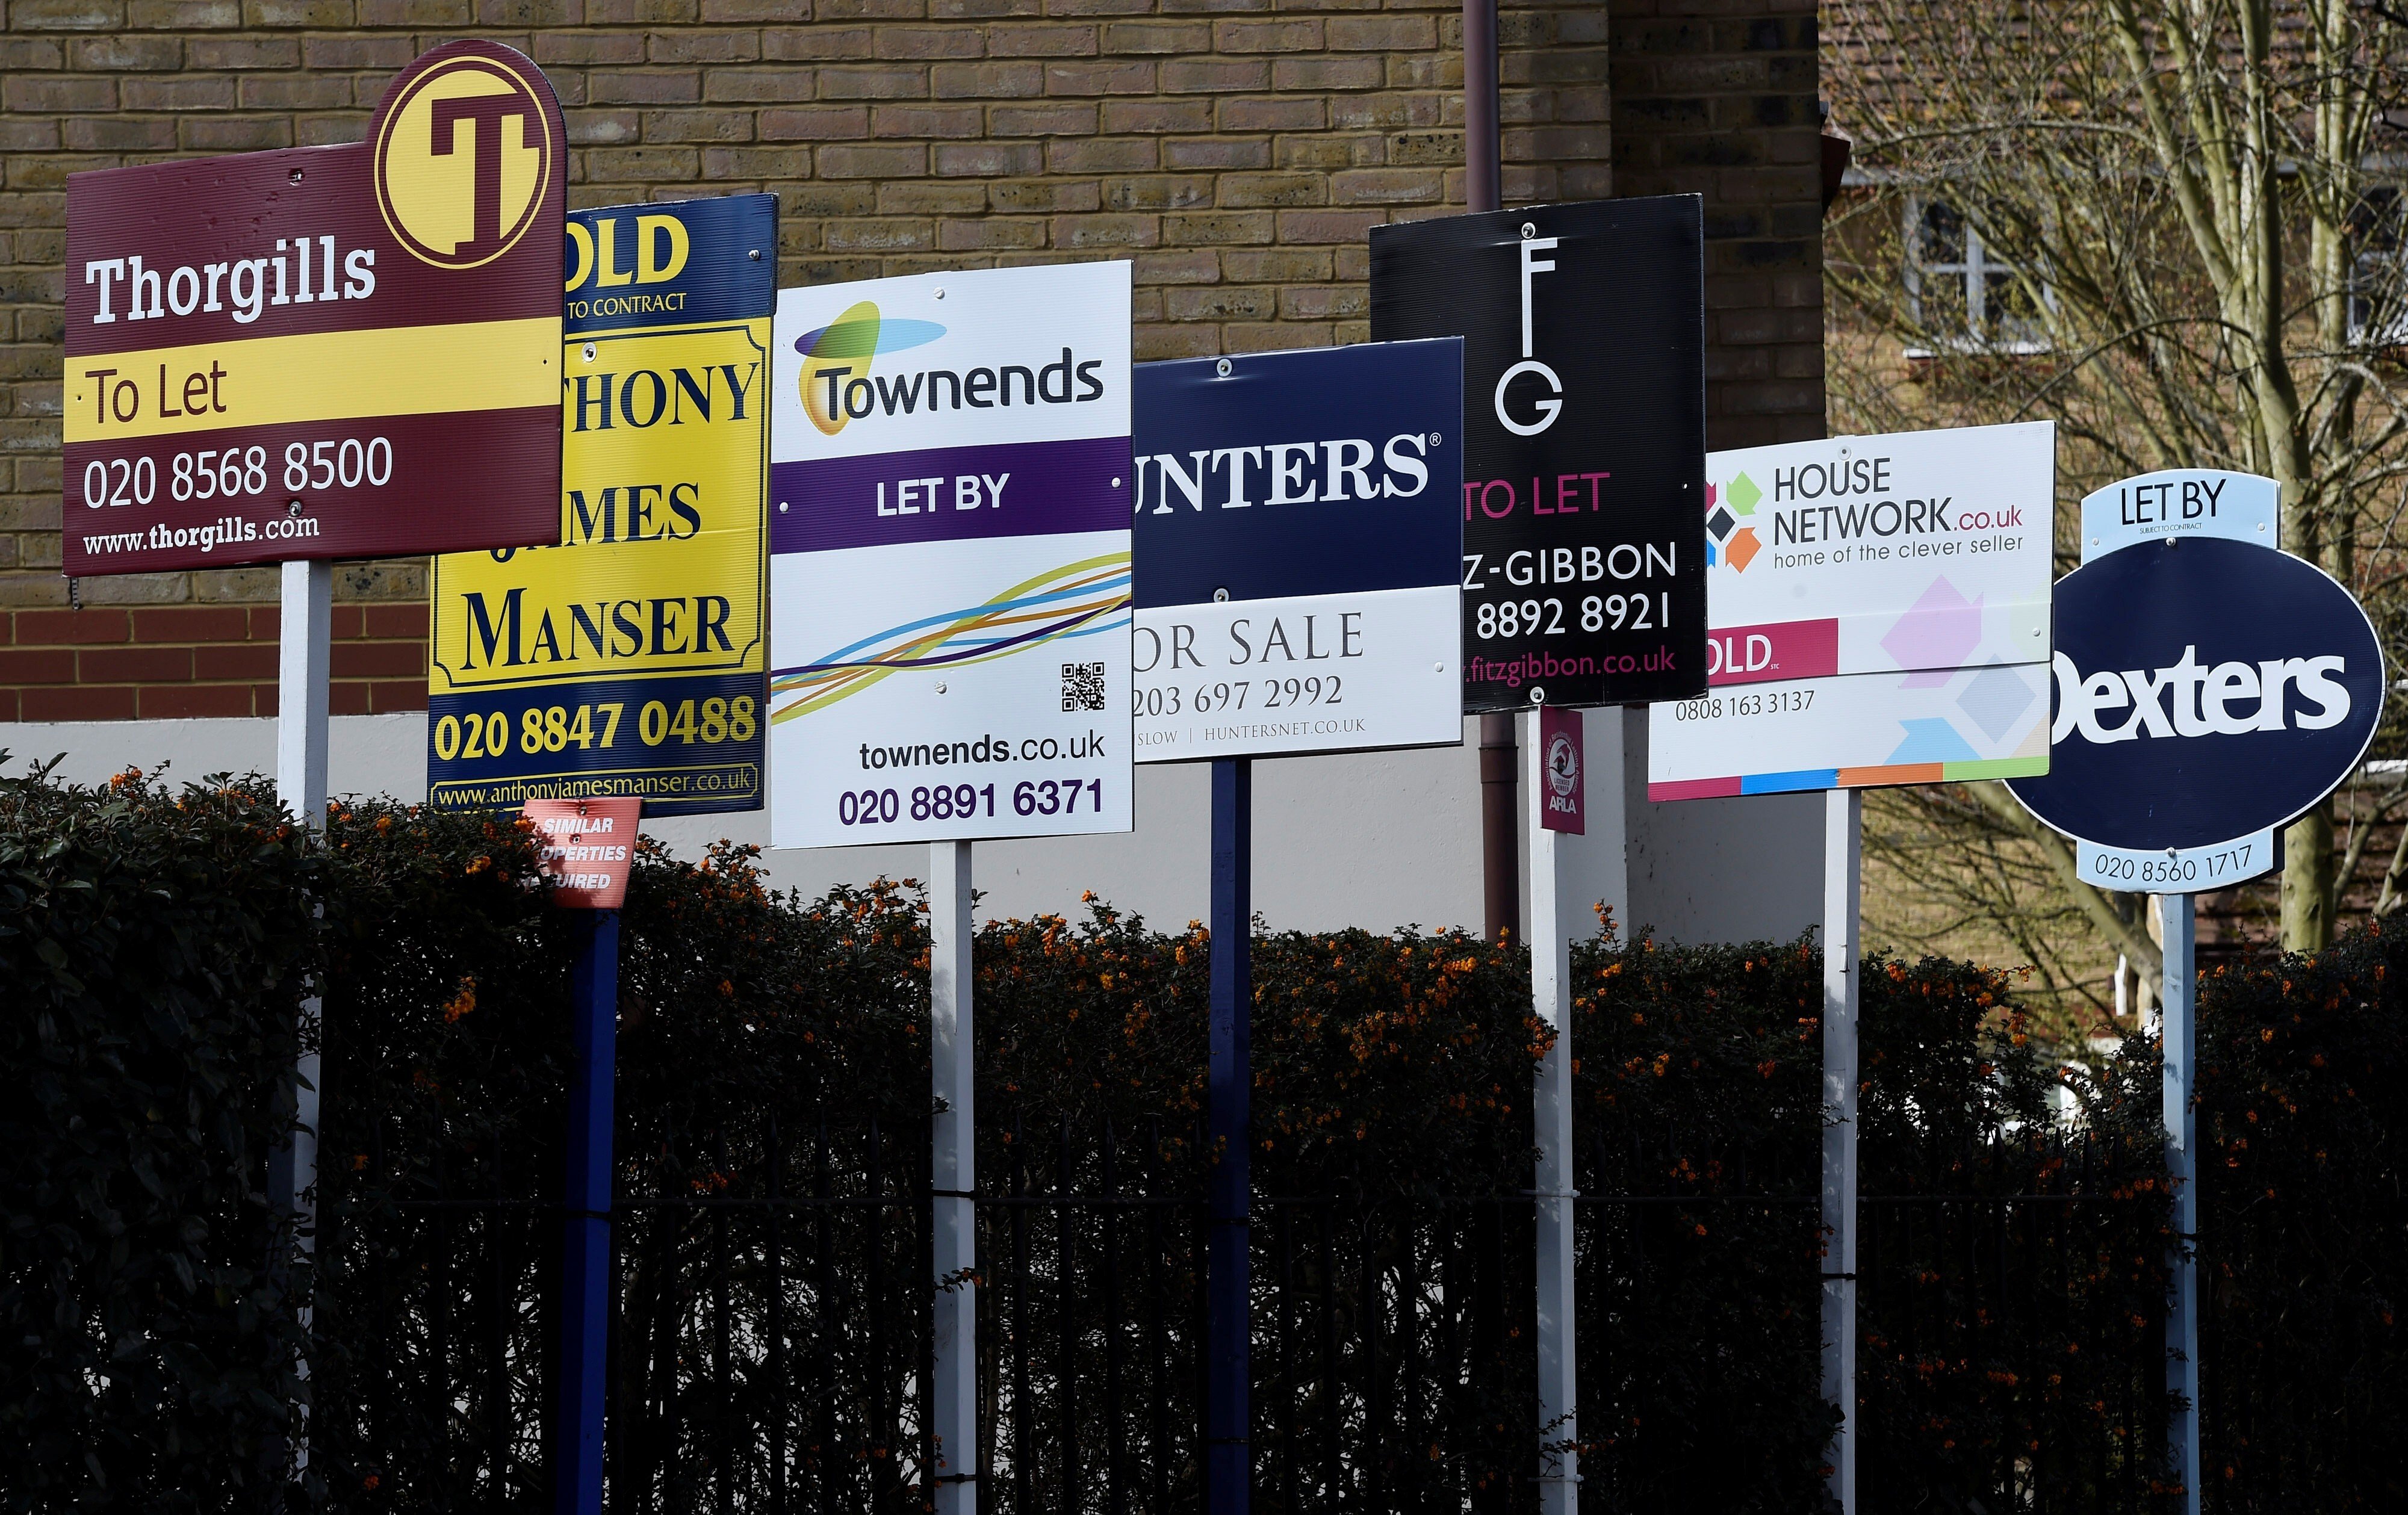 Property agents’ sales and to let signs are seen in London. London is epcted to see a revival in overseas buying interest after the pandemic ends. Photo: Reuters